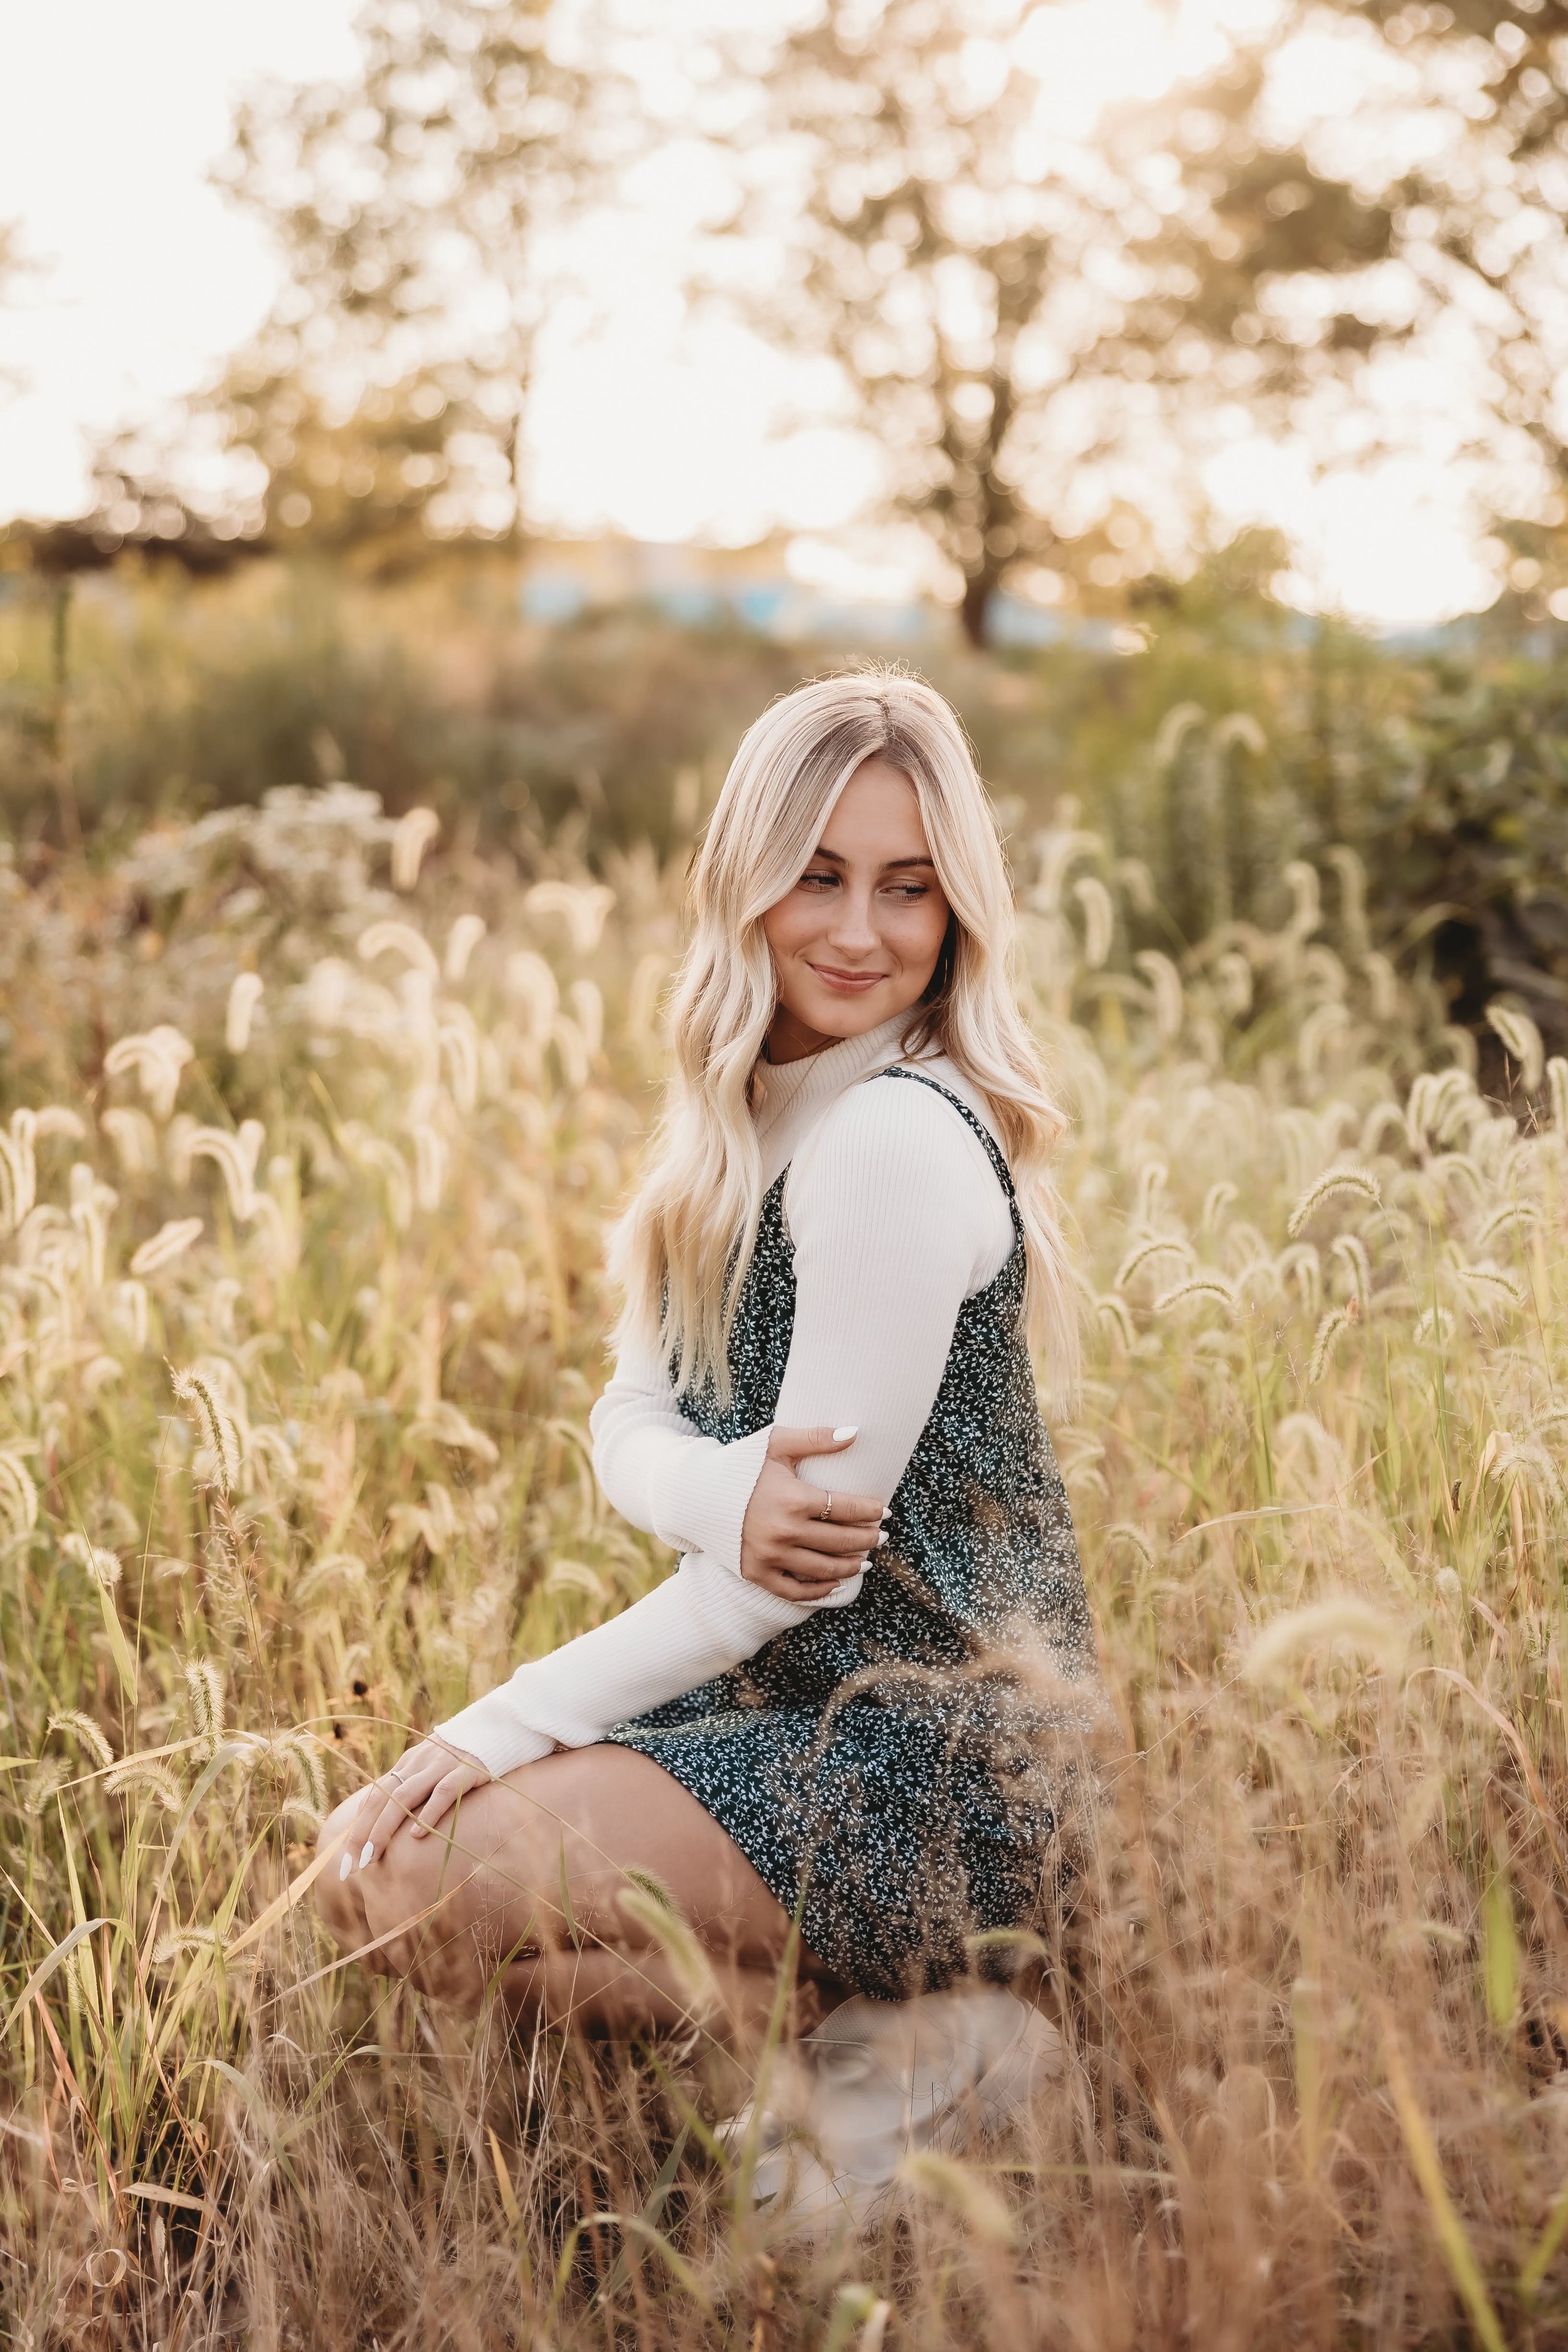  parker crouches down in a field as the sun sets behind her during her senior photos 